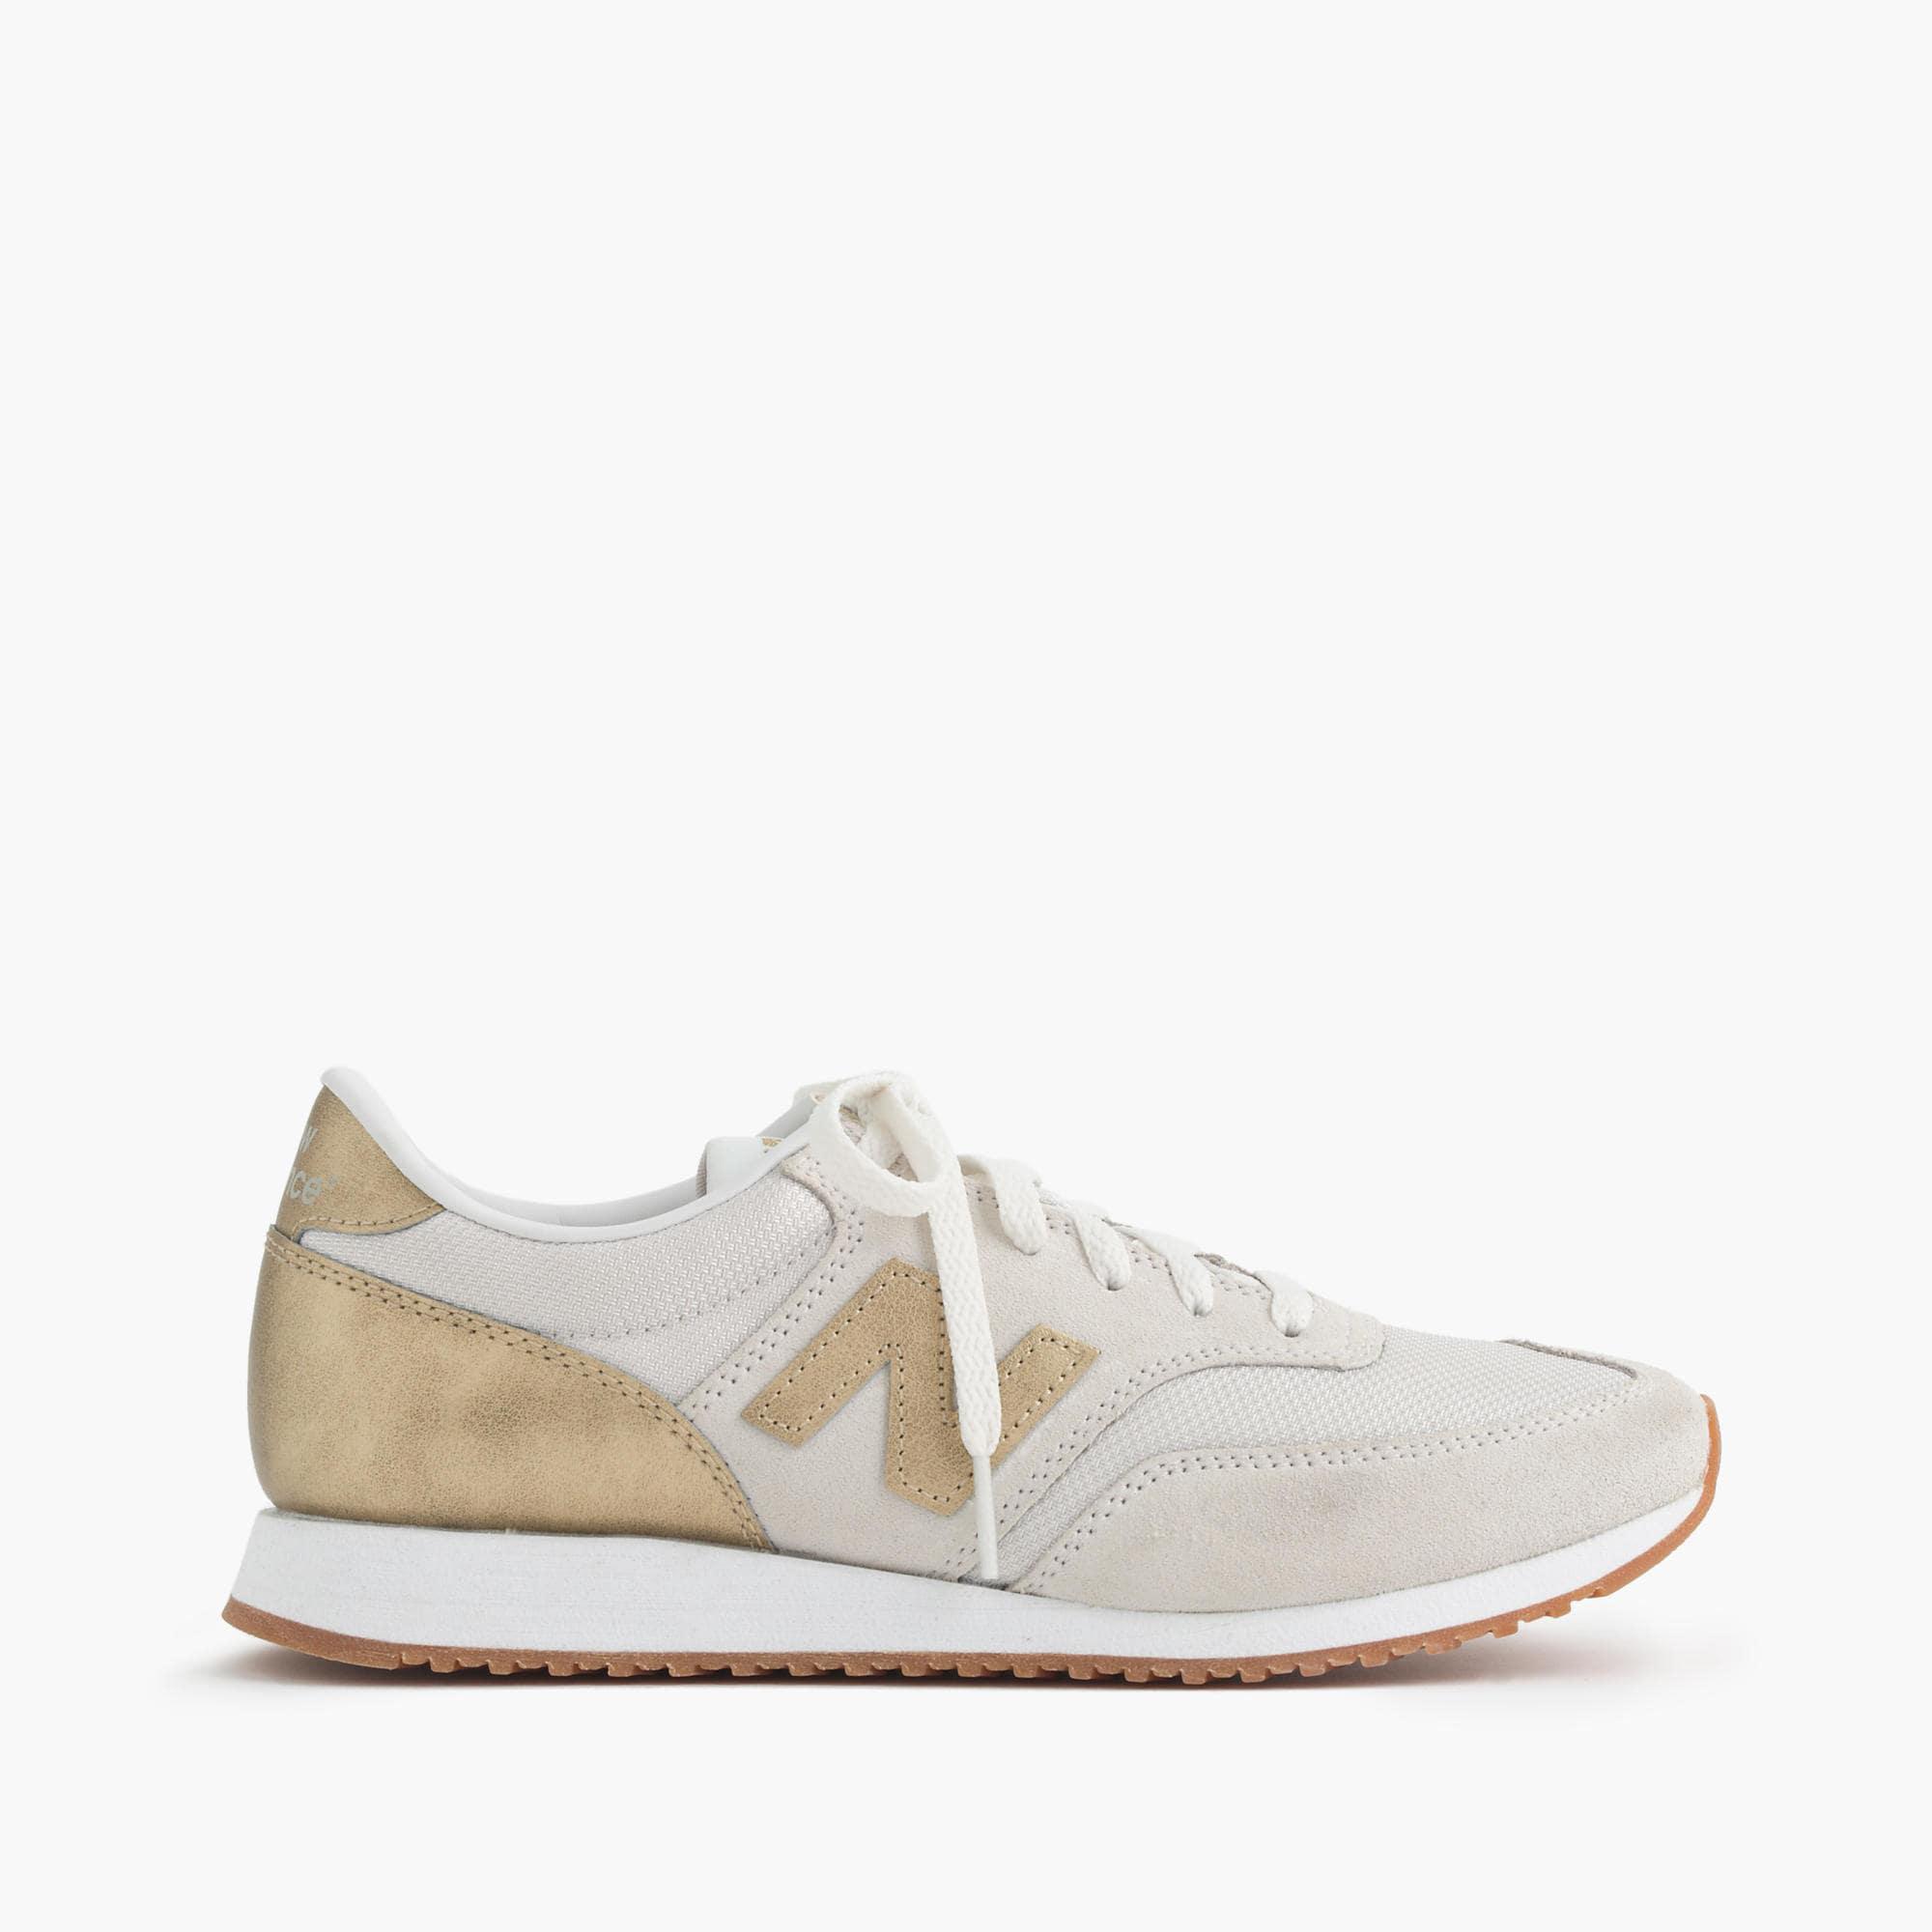 J.Crew New Balance Suede, Mesh and Leather 620 Sneakers in Metallic | Lyst